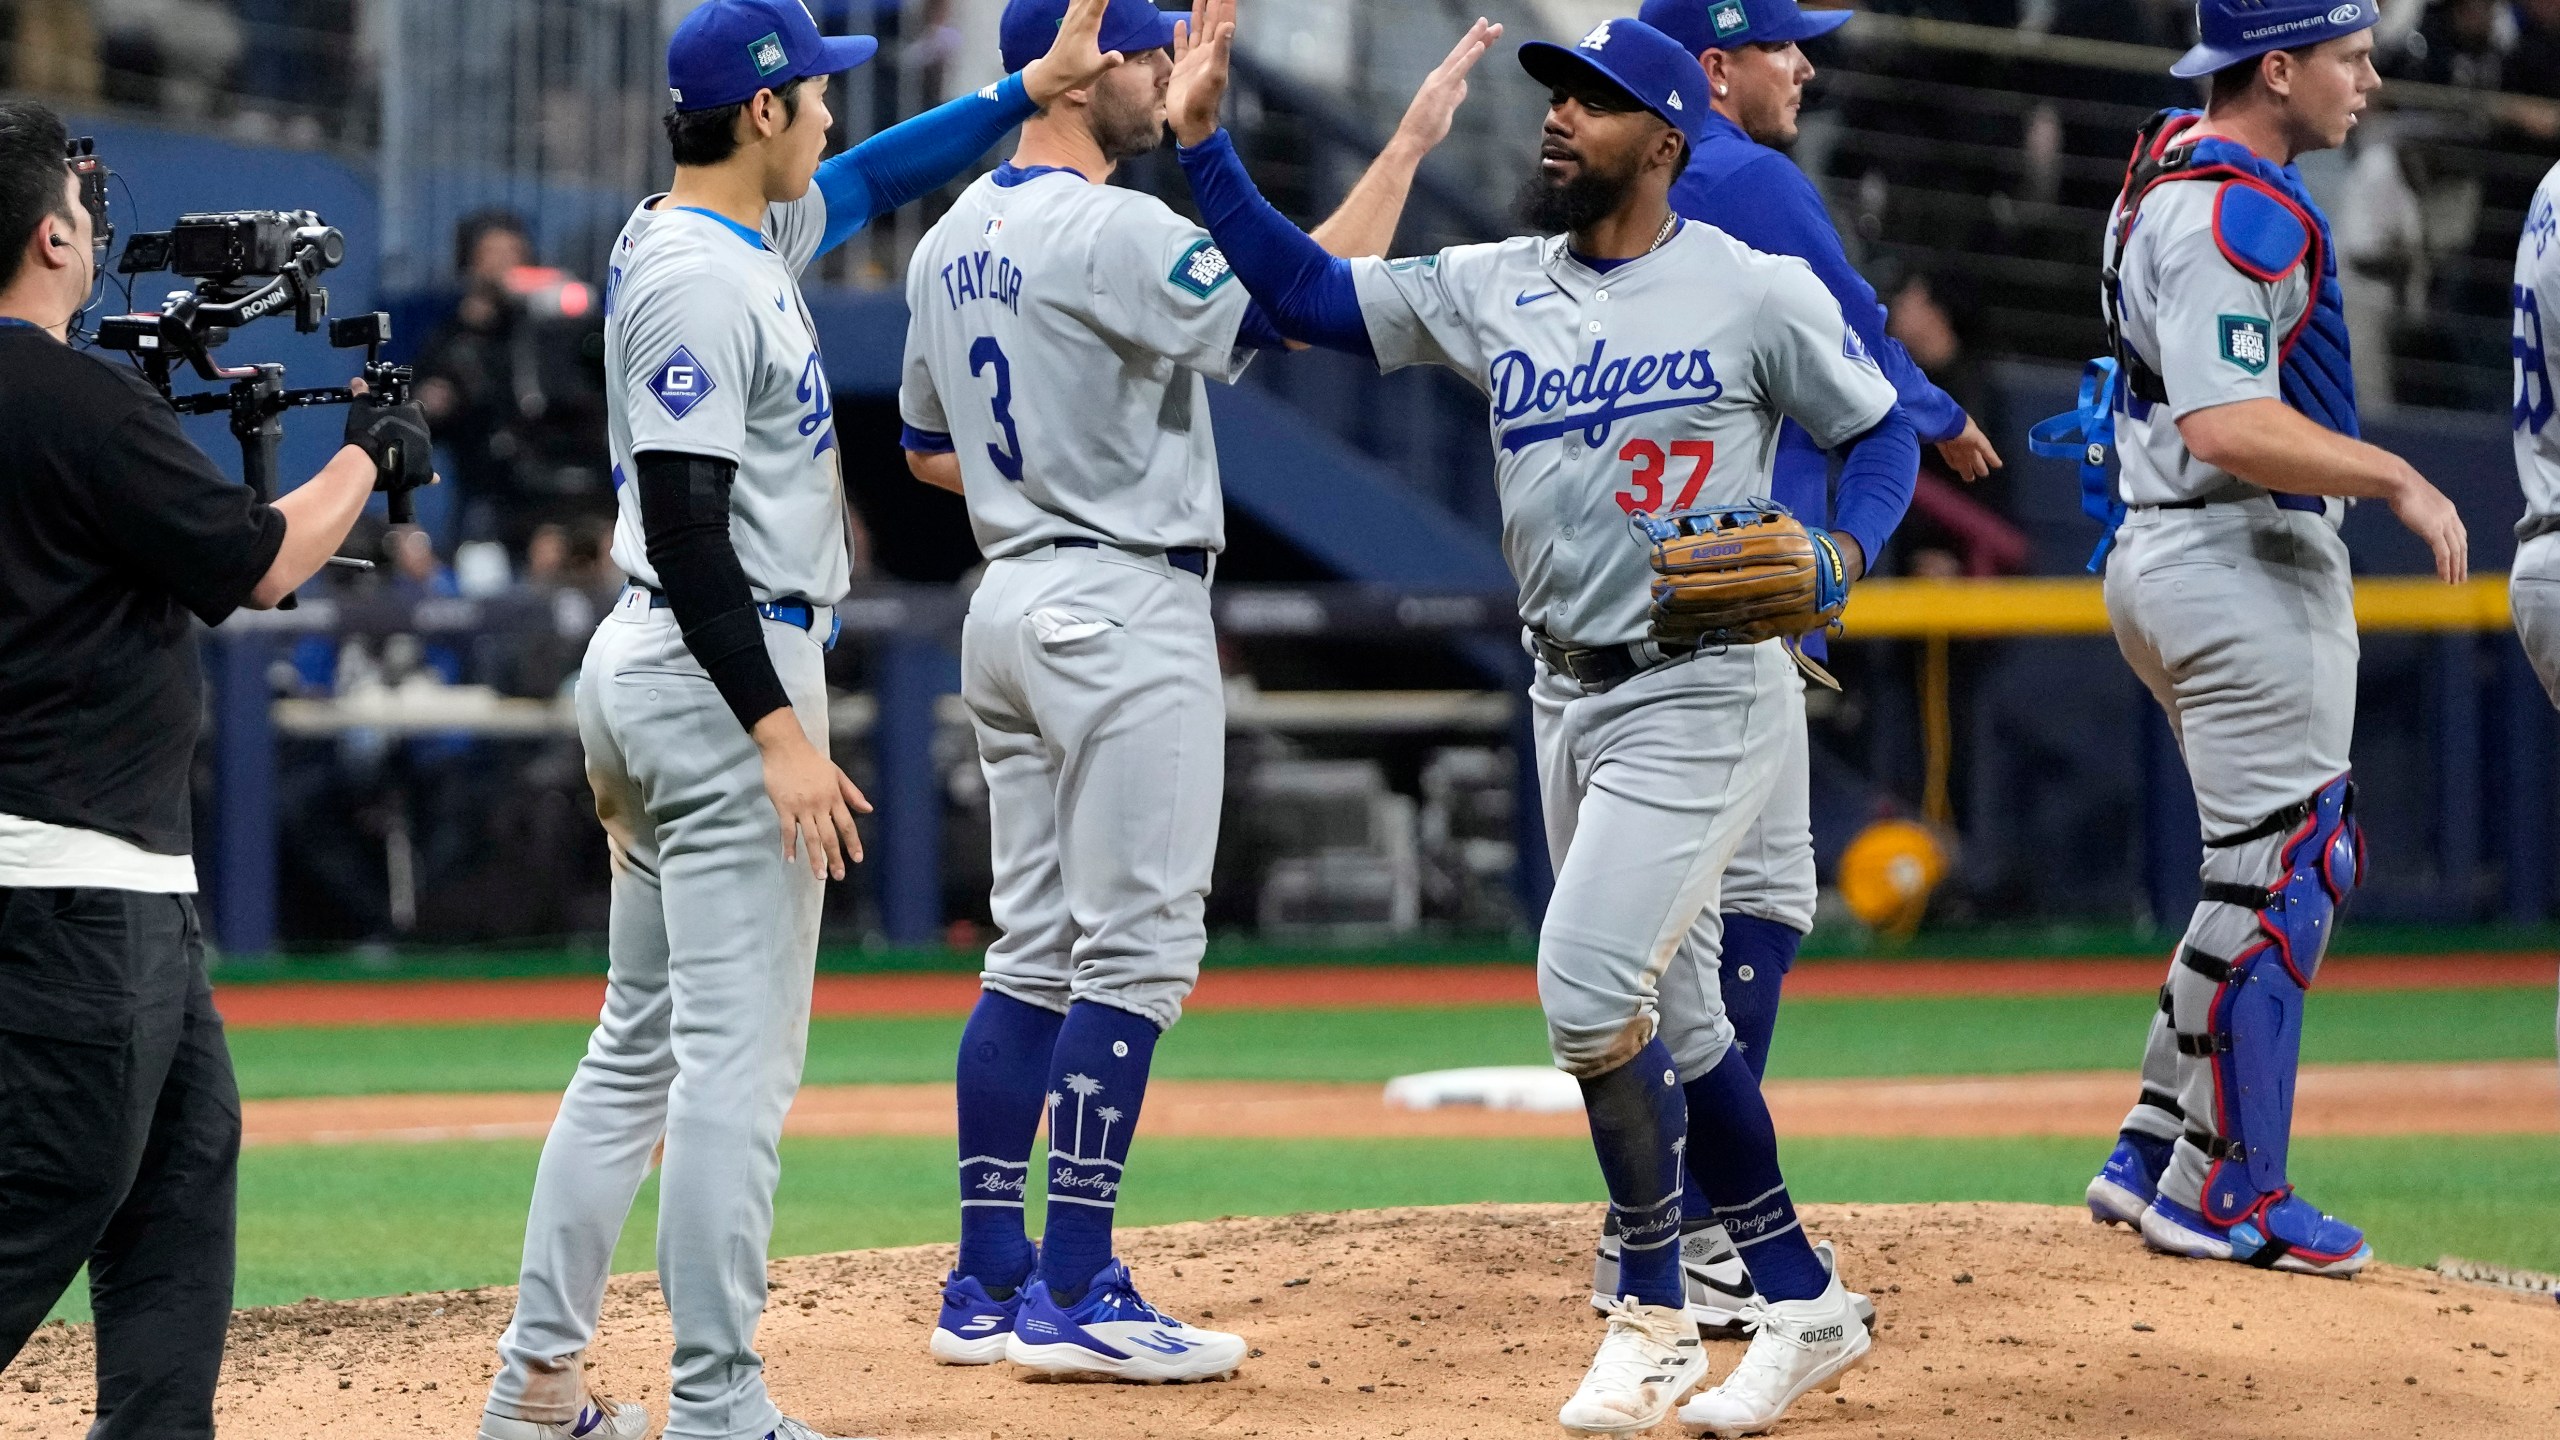 Los Angeles Dodgers designated hitter Shohei Ohtani, second from left, congratulates Teoscar Hernandez after the Dodgers defeated the San Diego Padres 5-2 in an opening day baseball game at the Gocheok Sky Dome in Seoul, South Korea Wednesday, March 20, 2024, in Seoul, South Korea. (AP Photo/Lee Jin-man)